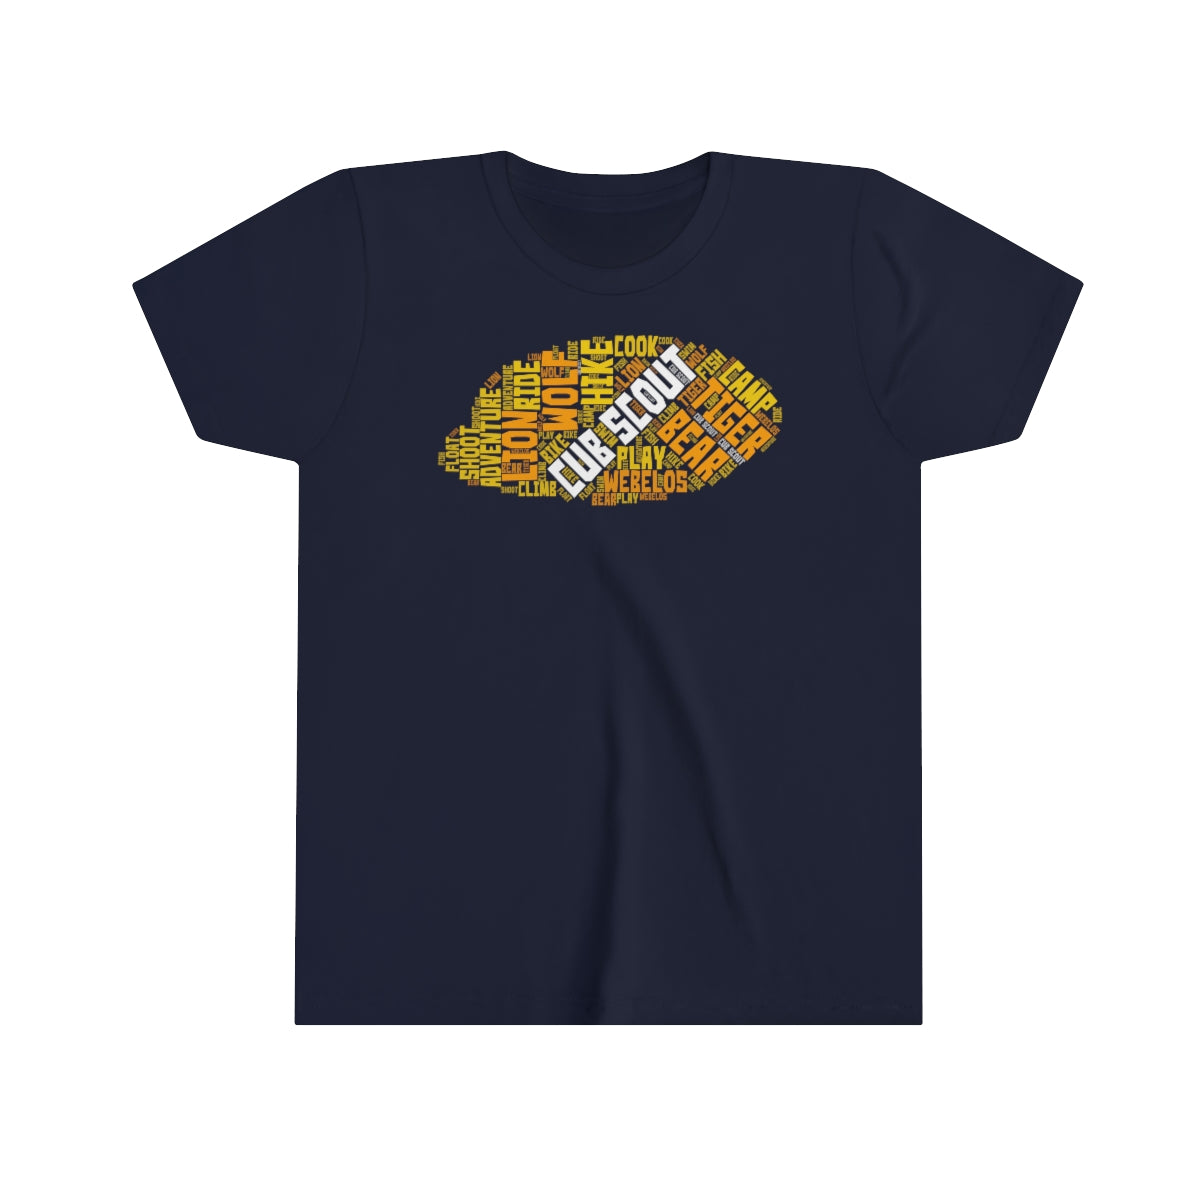 Cub Scout Cloud Tee - Youth